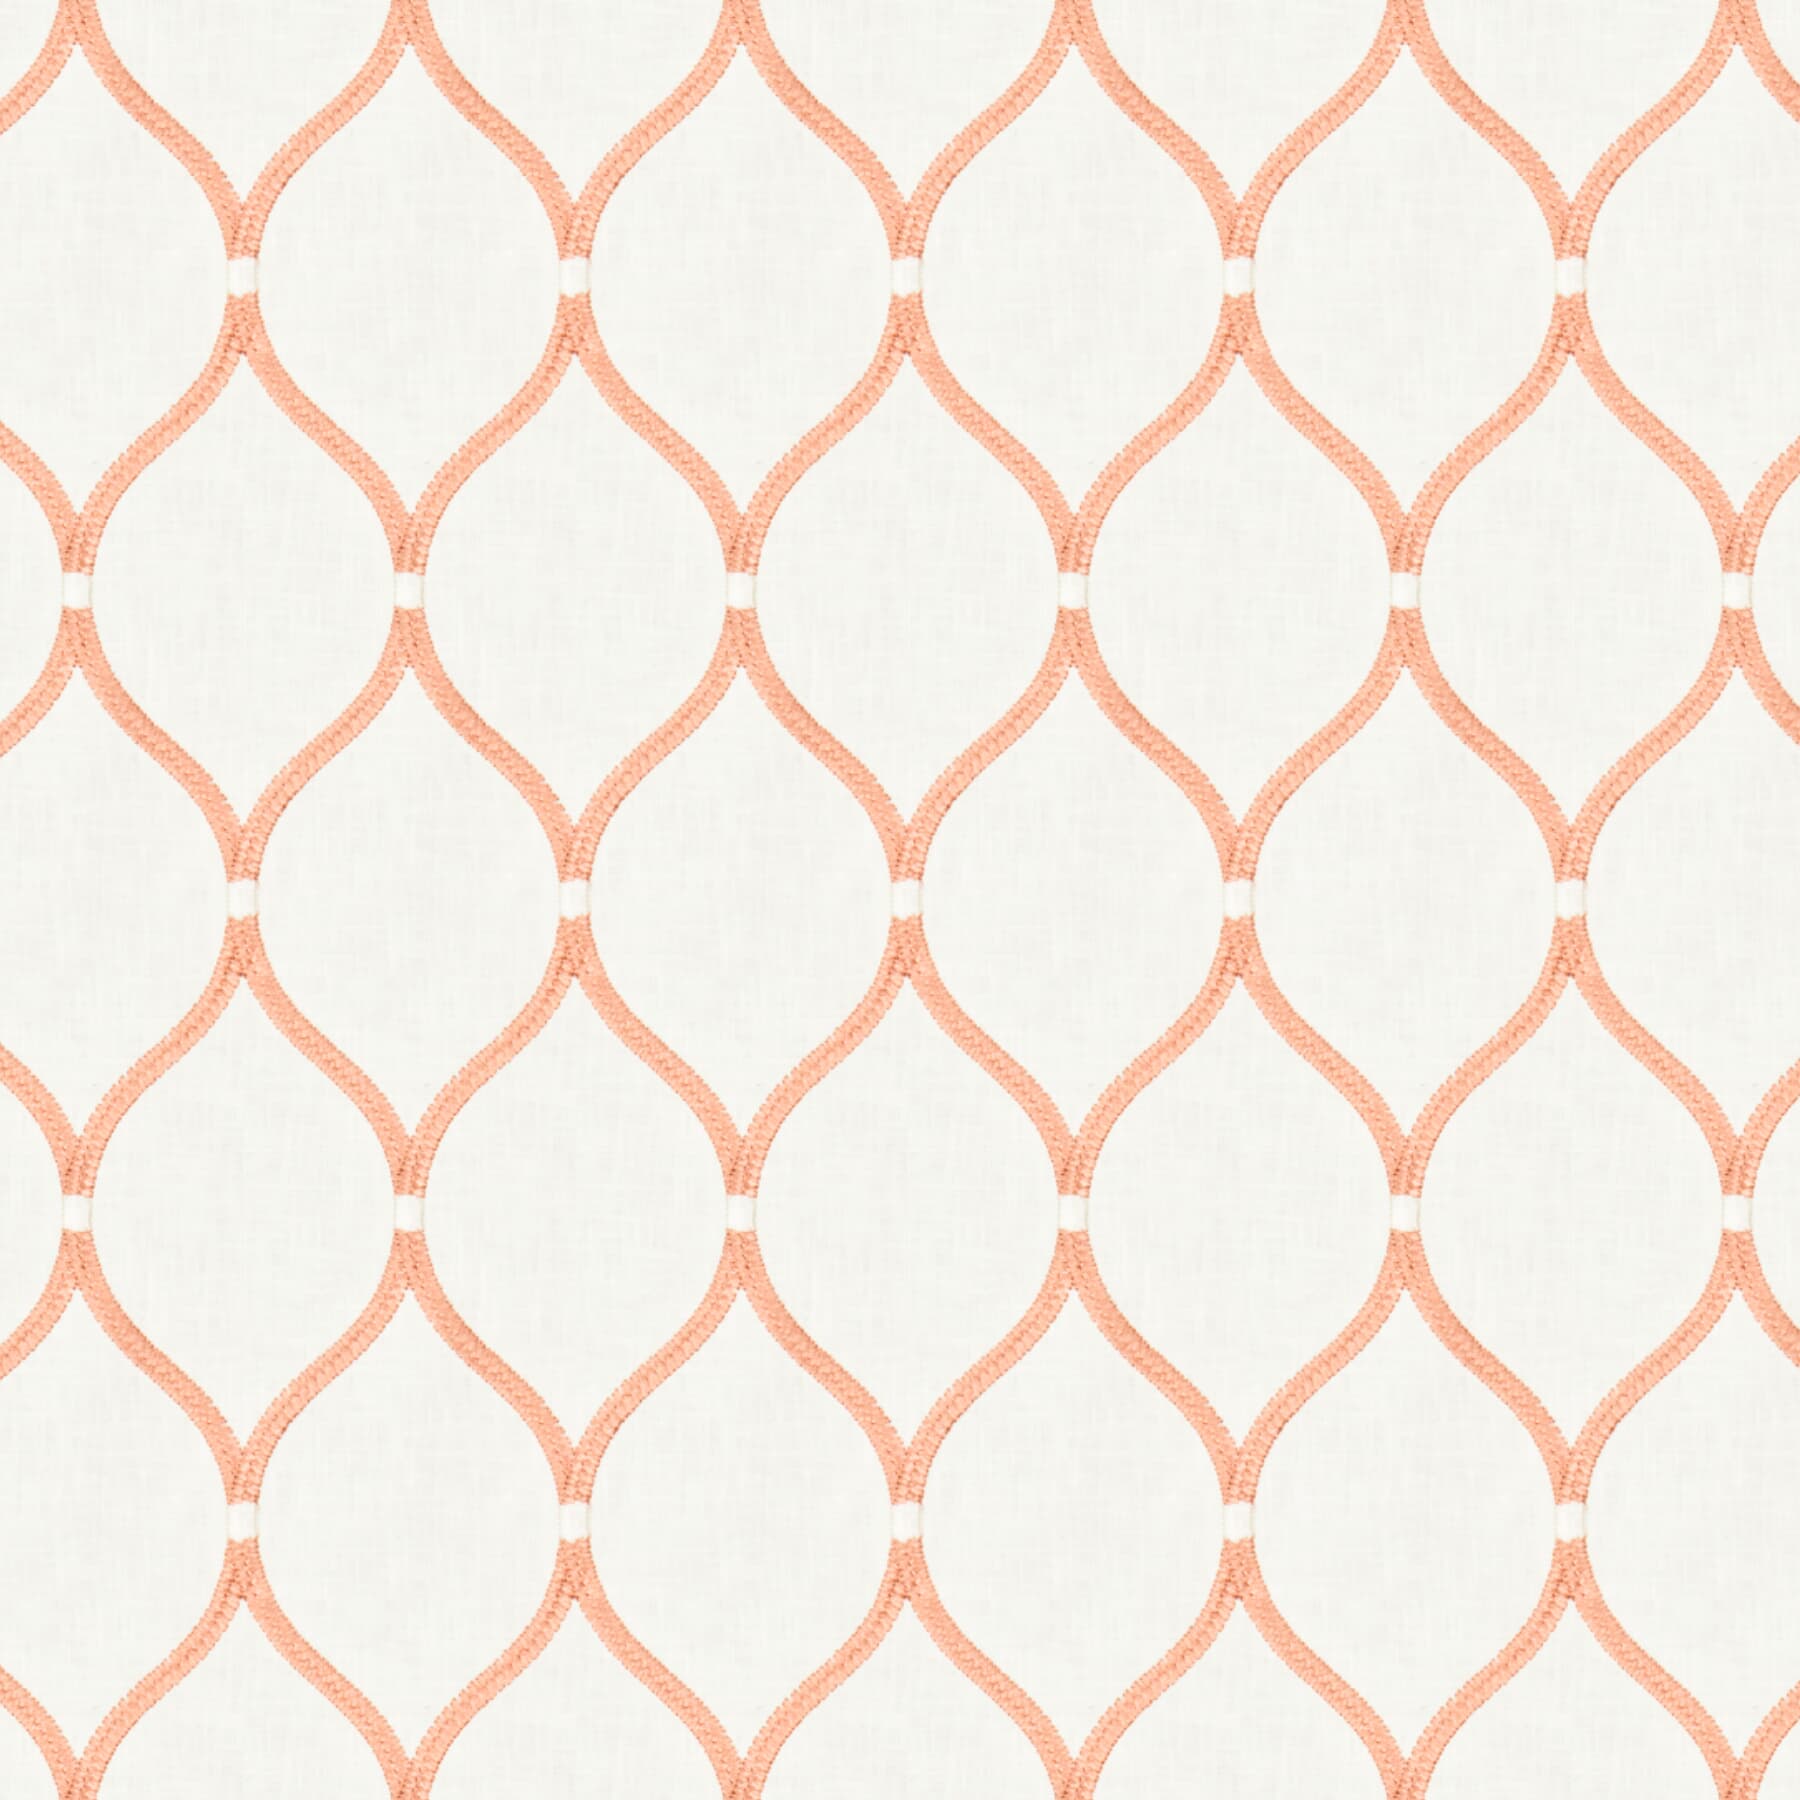 Ebbtide 5 Coral by Stout Fabric